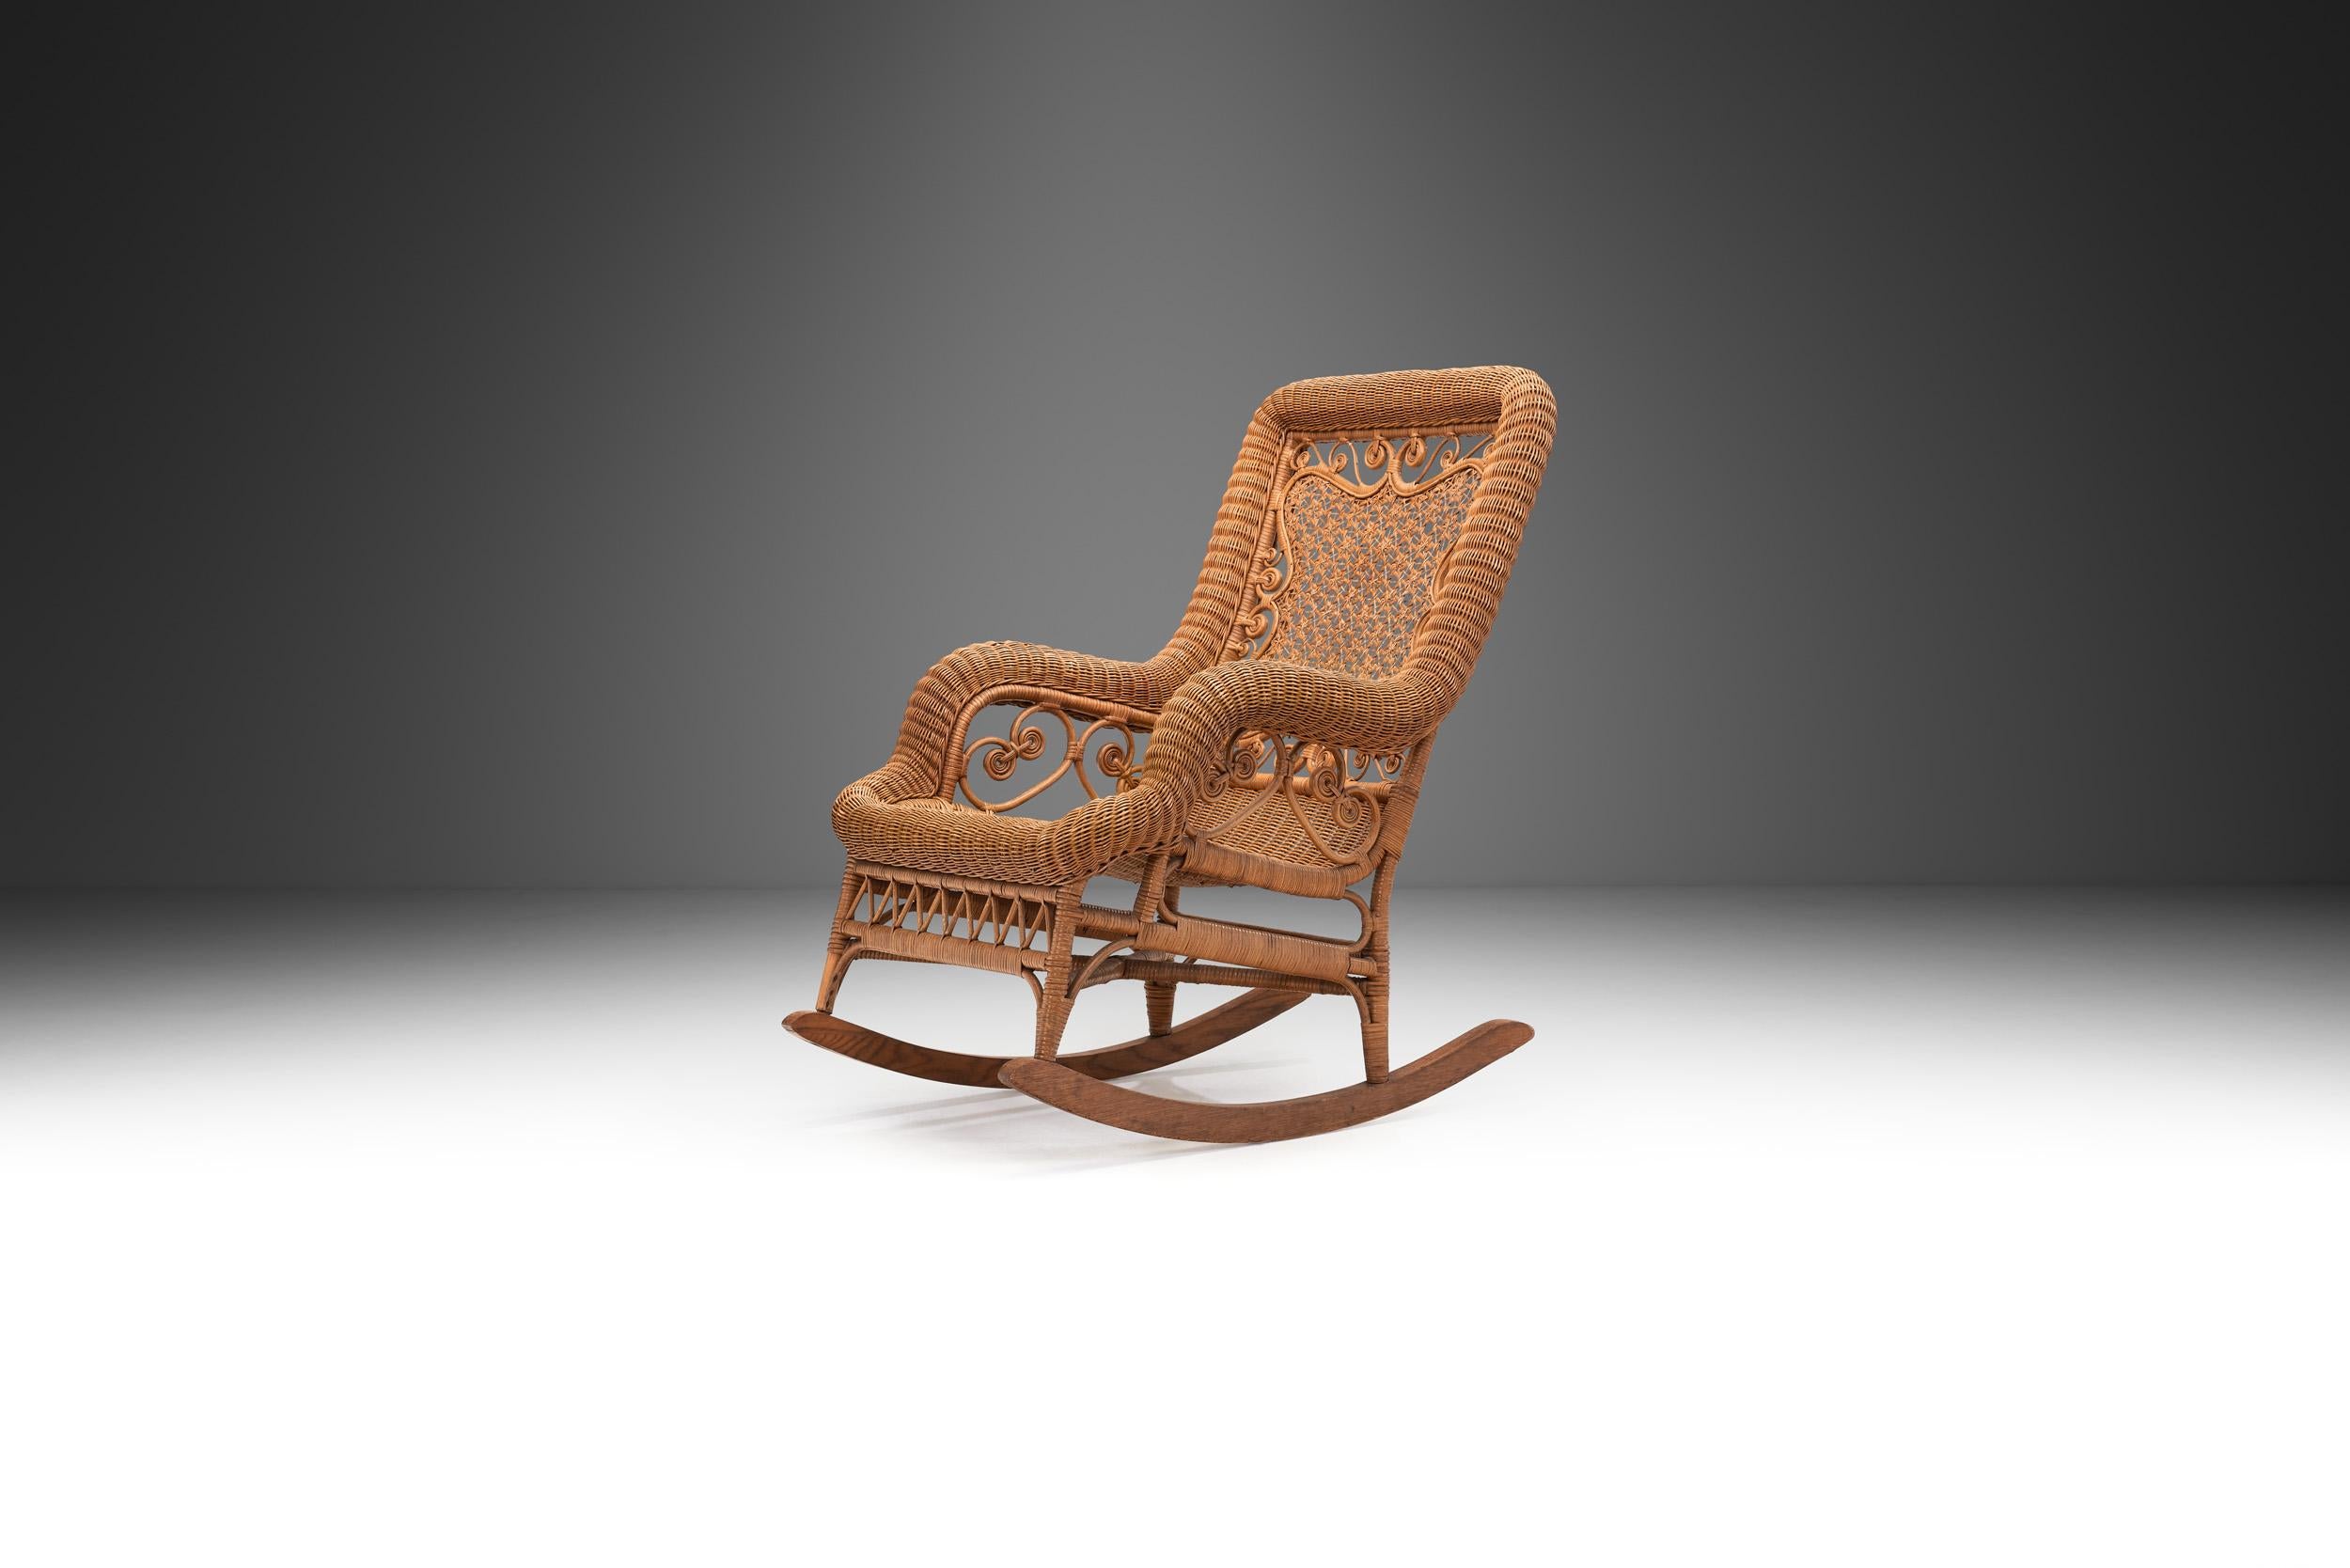 This lovely piece from the 20th century is crafted from the organic materials rattan and bamboo, and embodies a harmonious blend of natural beauty, craftsmanship, and functional elegance, making it a perfect accent piece for both modern and classic